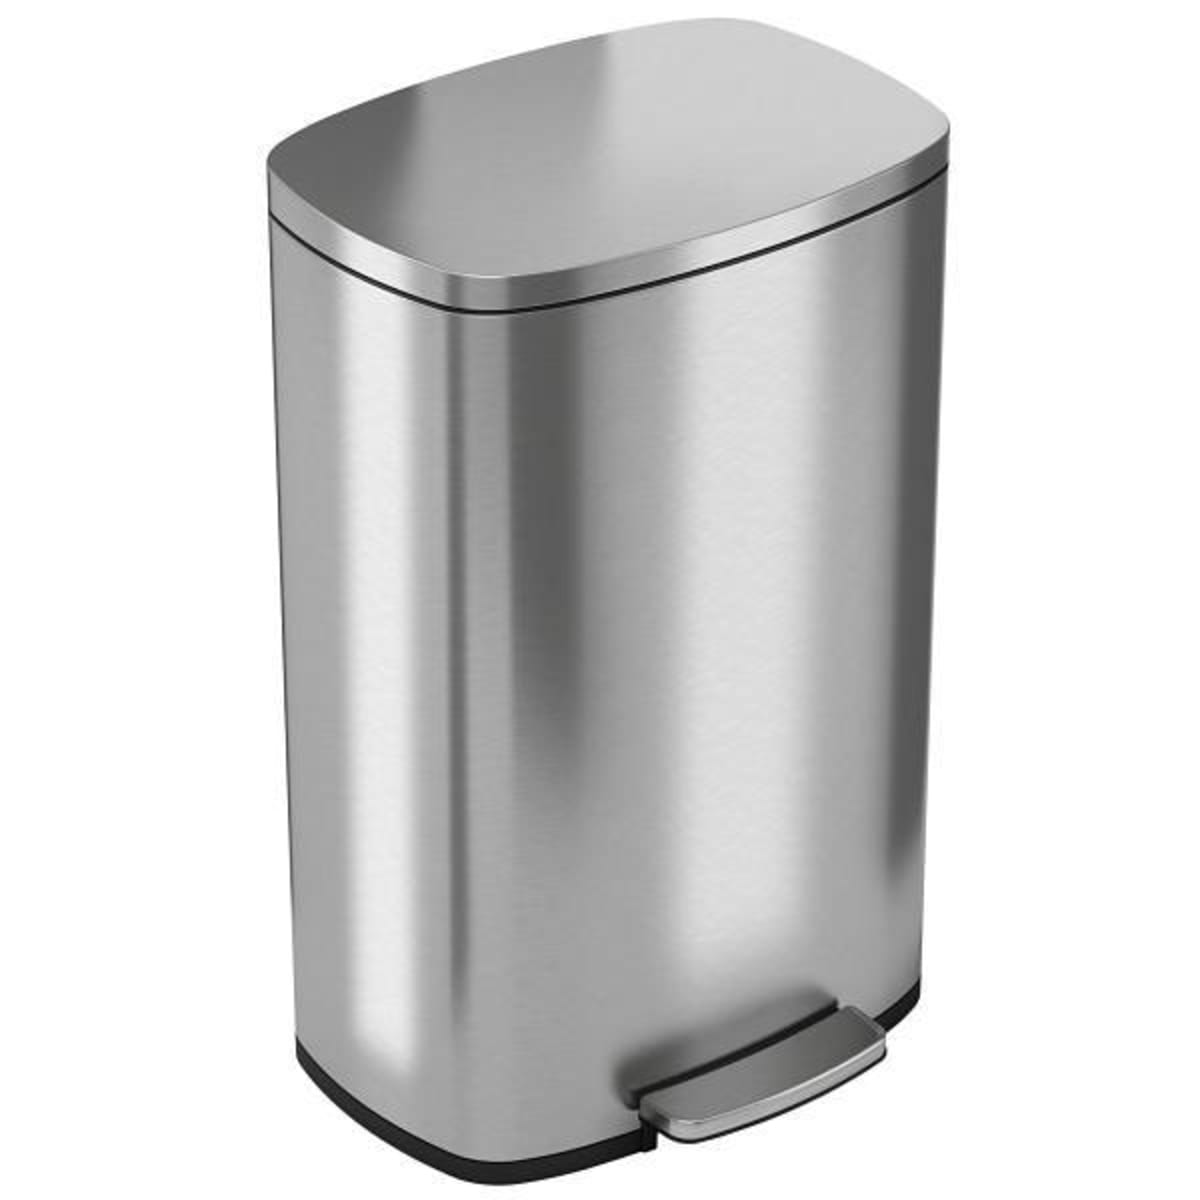 HLS Commercial 13 Gallon Elliptical Open Top Stainless Steel Trash Can